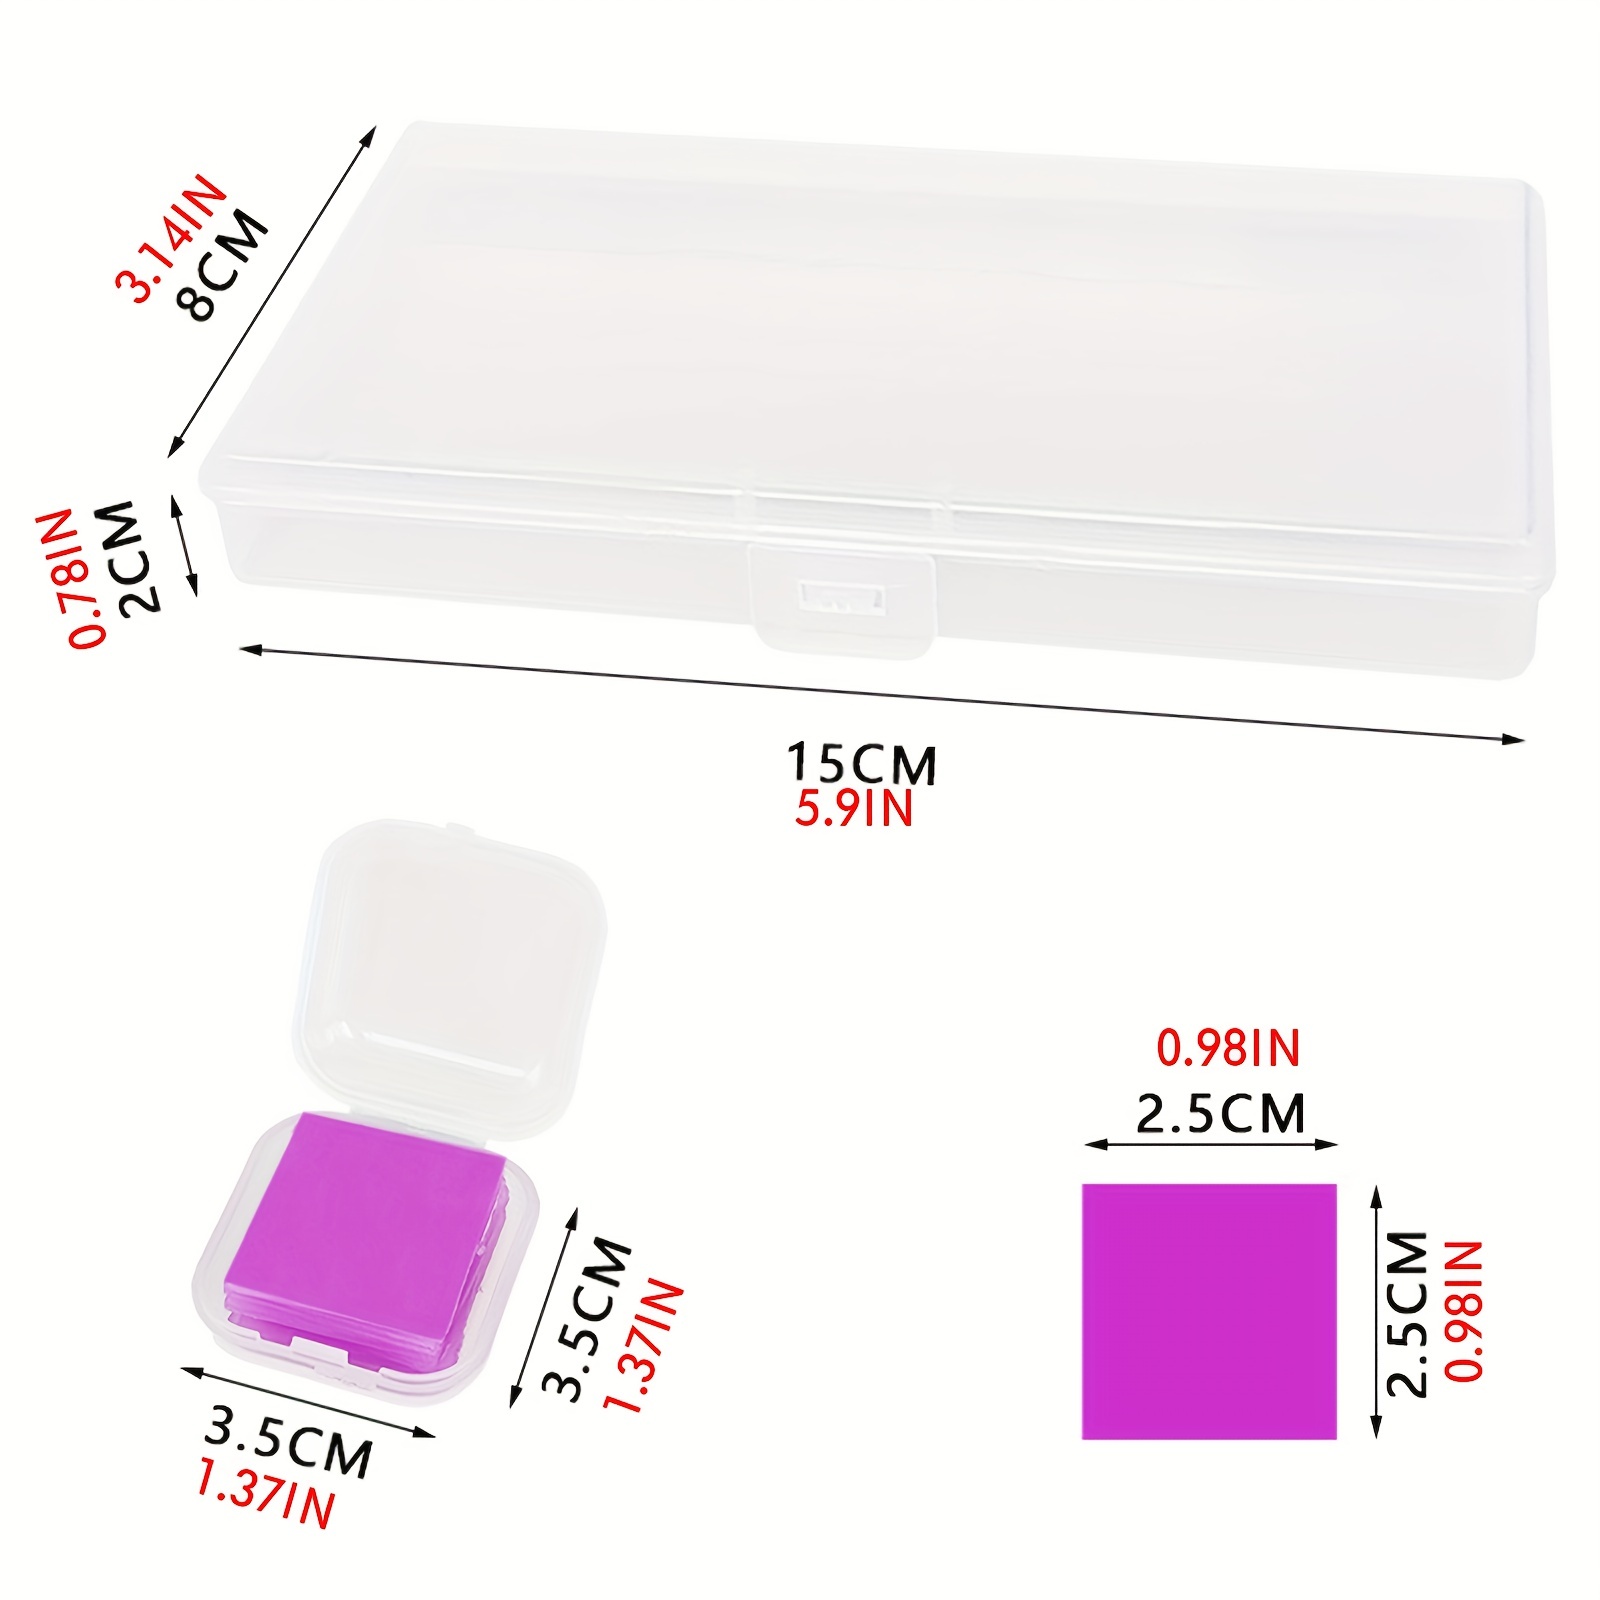 10Pcs Artificial Diamond Painting Wax Storage Container Case With Glue  Clay, Artificial Diamond Art Glue Wax For Diamond Painting